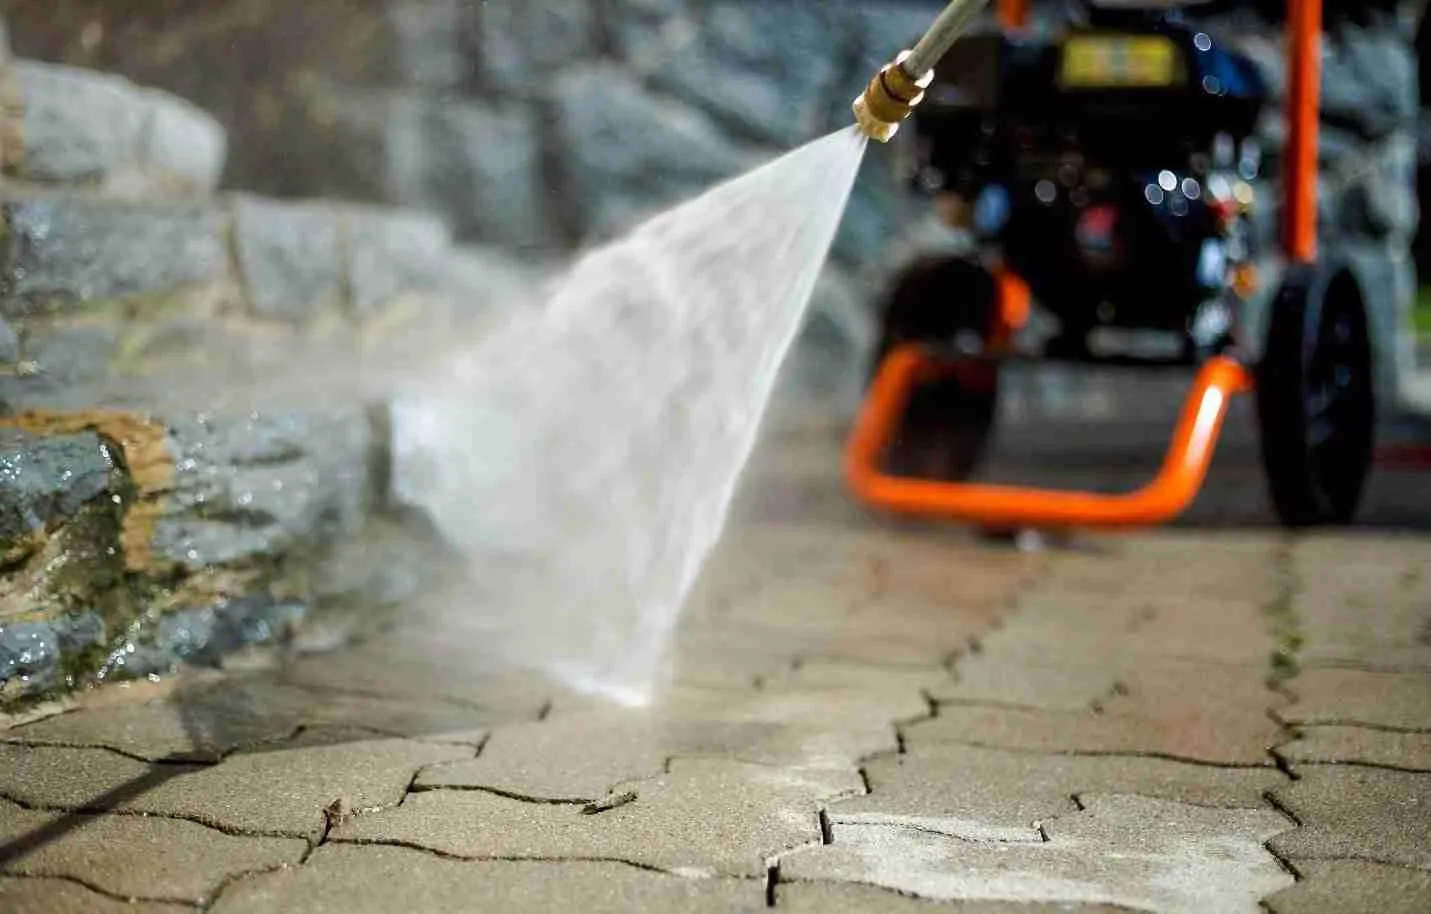 can you pressure wash pavers